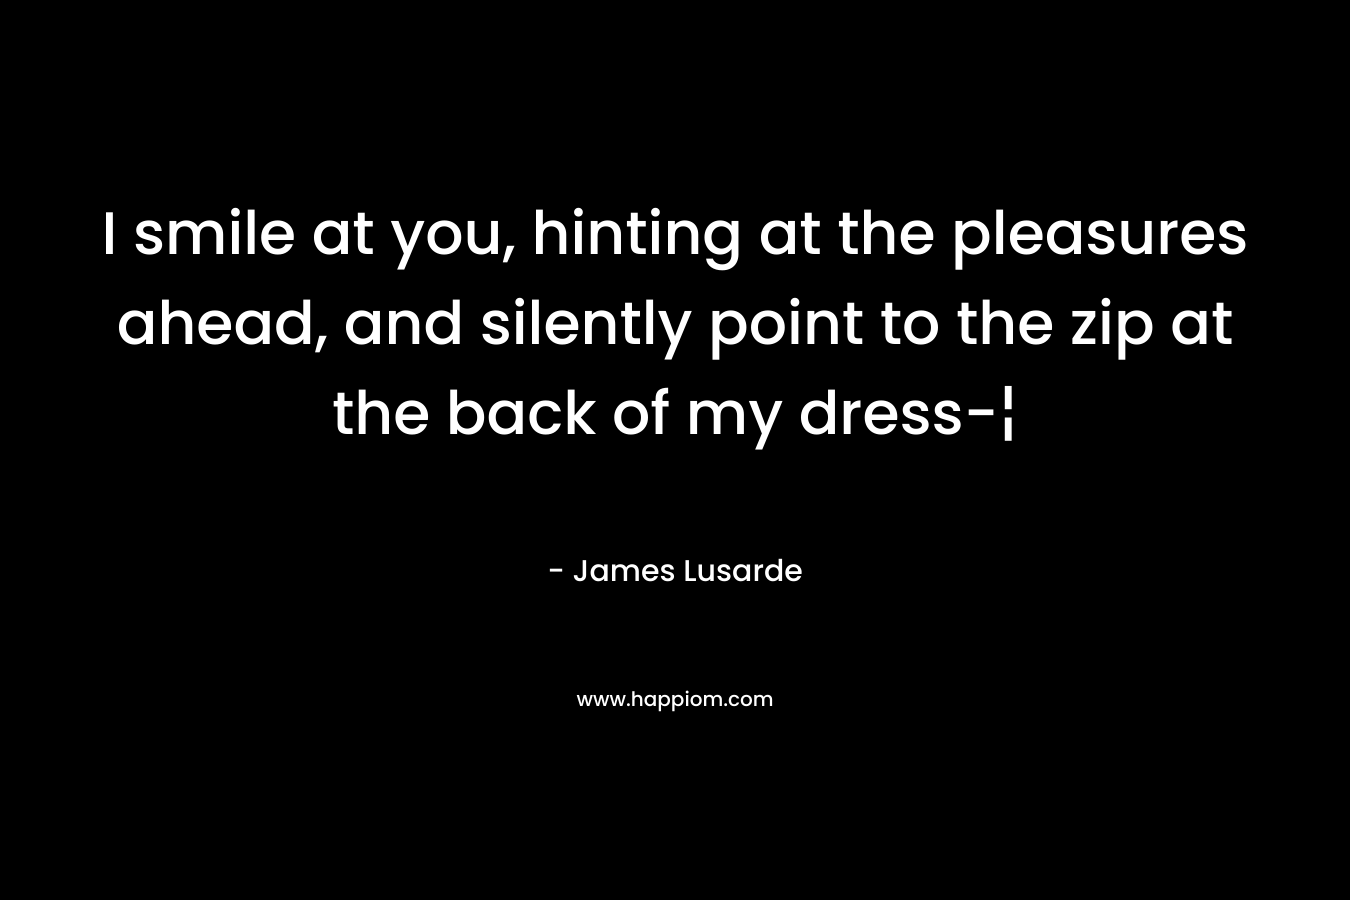 I smile at you, hinting at the pleasures ahead, and silently point to the zip at the back of my dress-¦ – James Lusarde